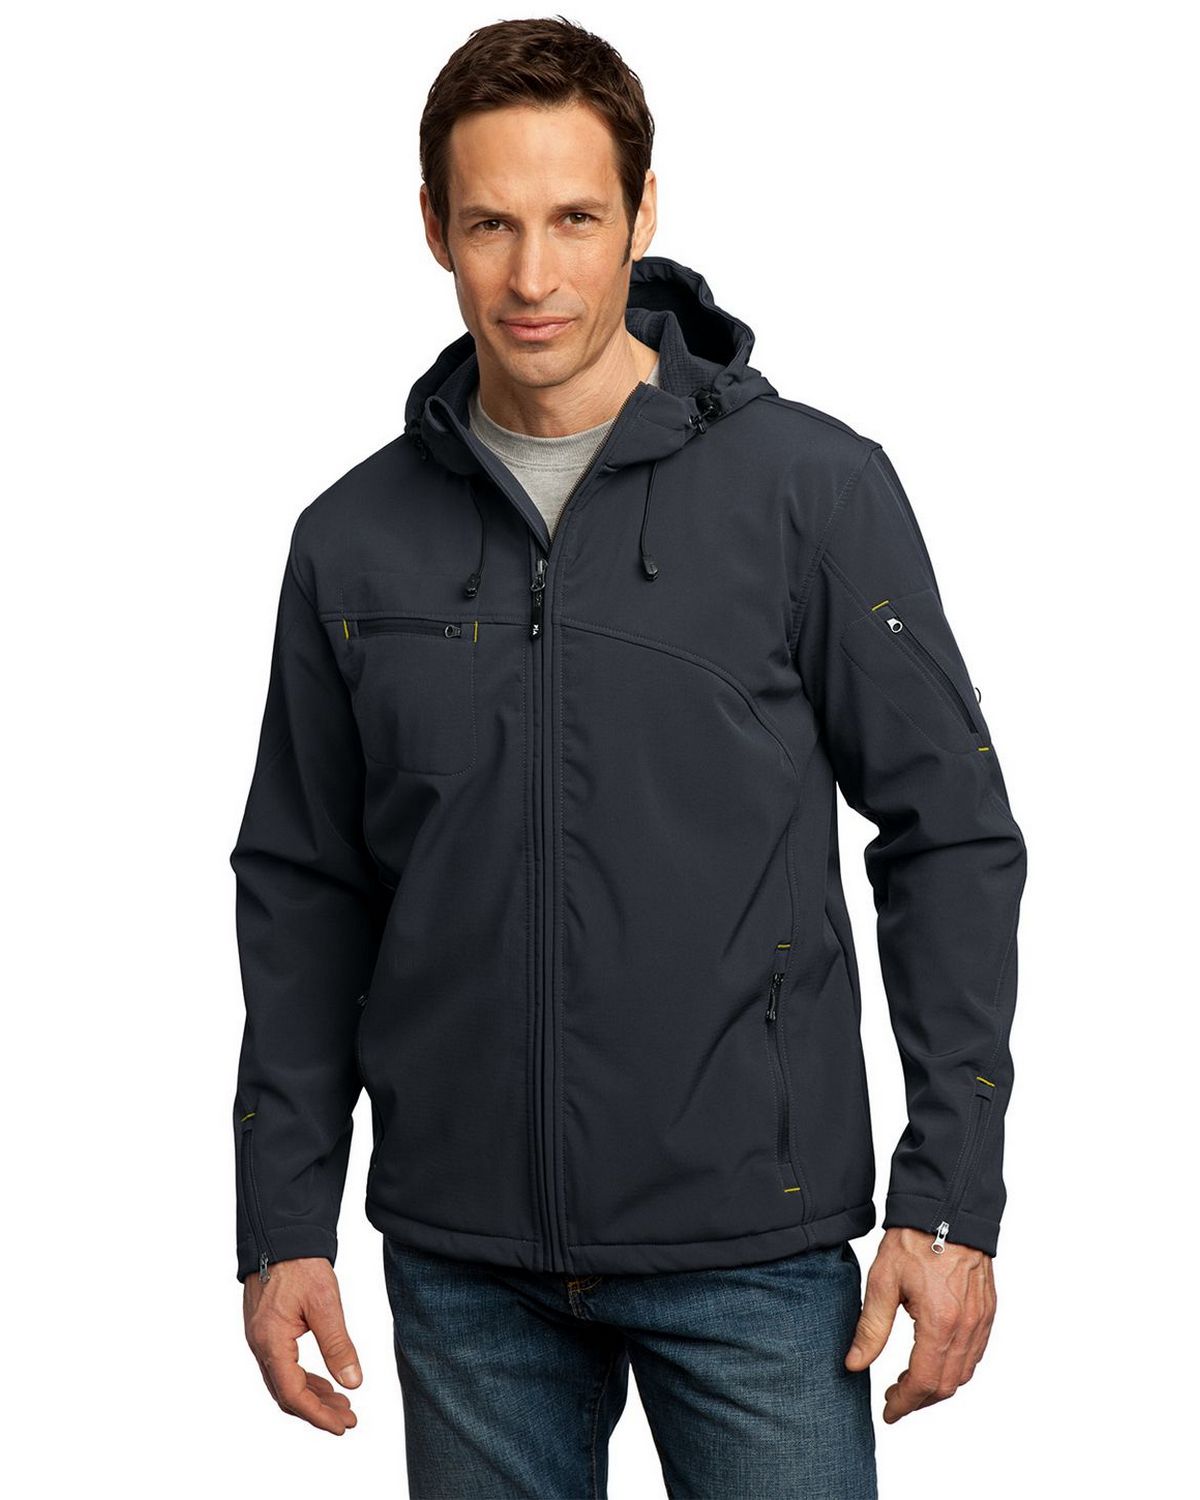 Port Authority J706 Textured Hooded Soft Shell Jacket - ApparelnBags.com